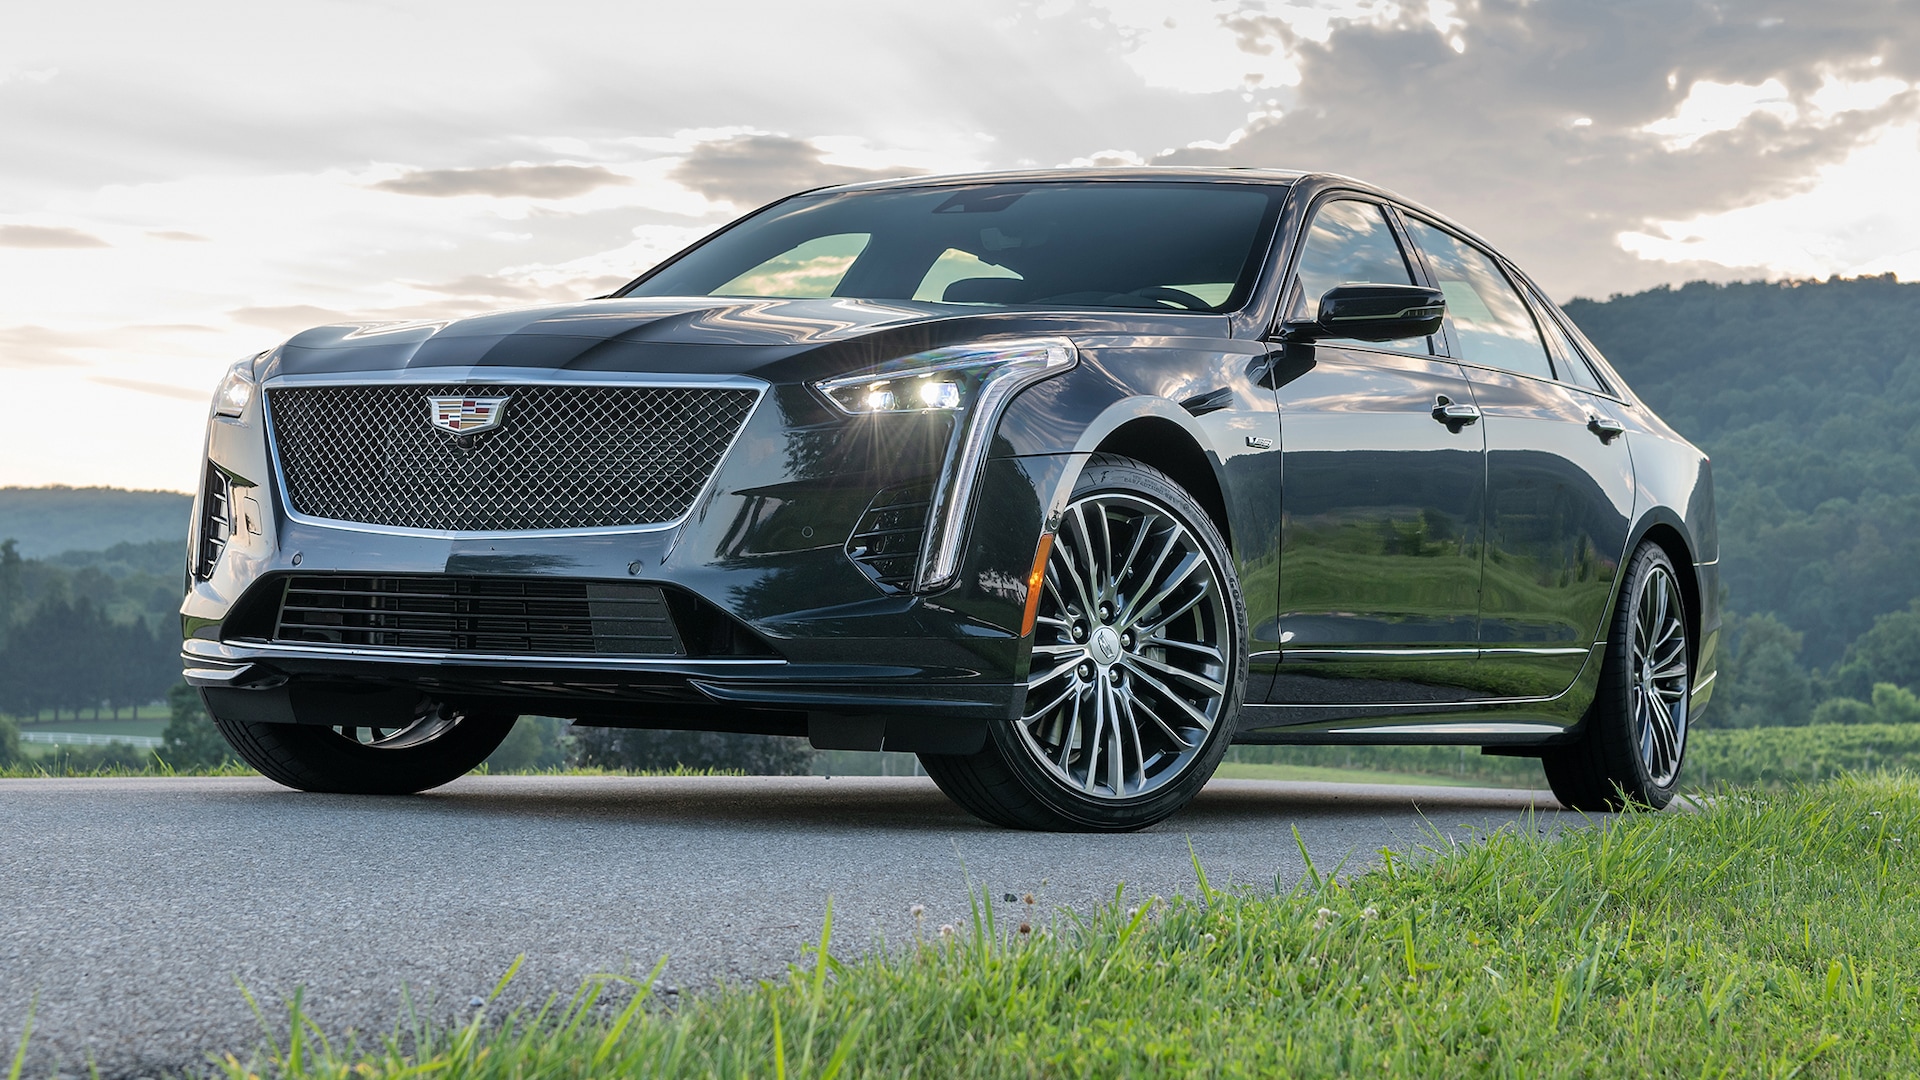 2019 Cadillac CT6-V Review: The 550-HP Blackwing V-8 Has Arrived